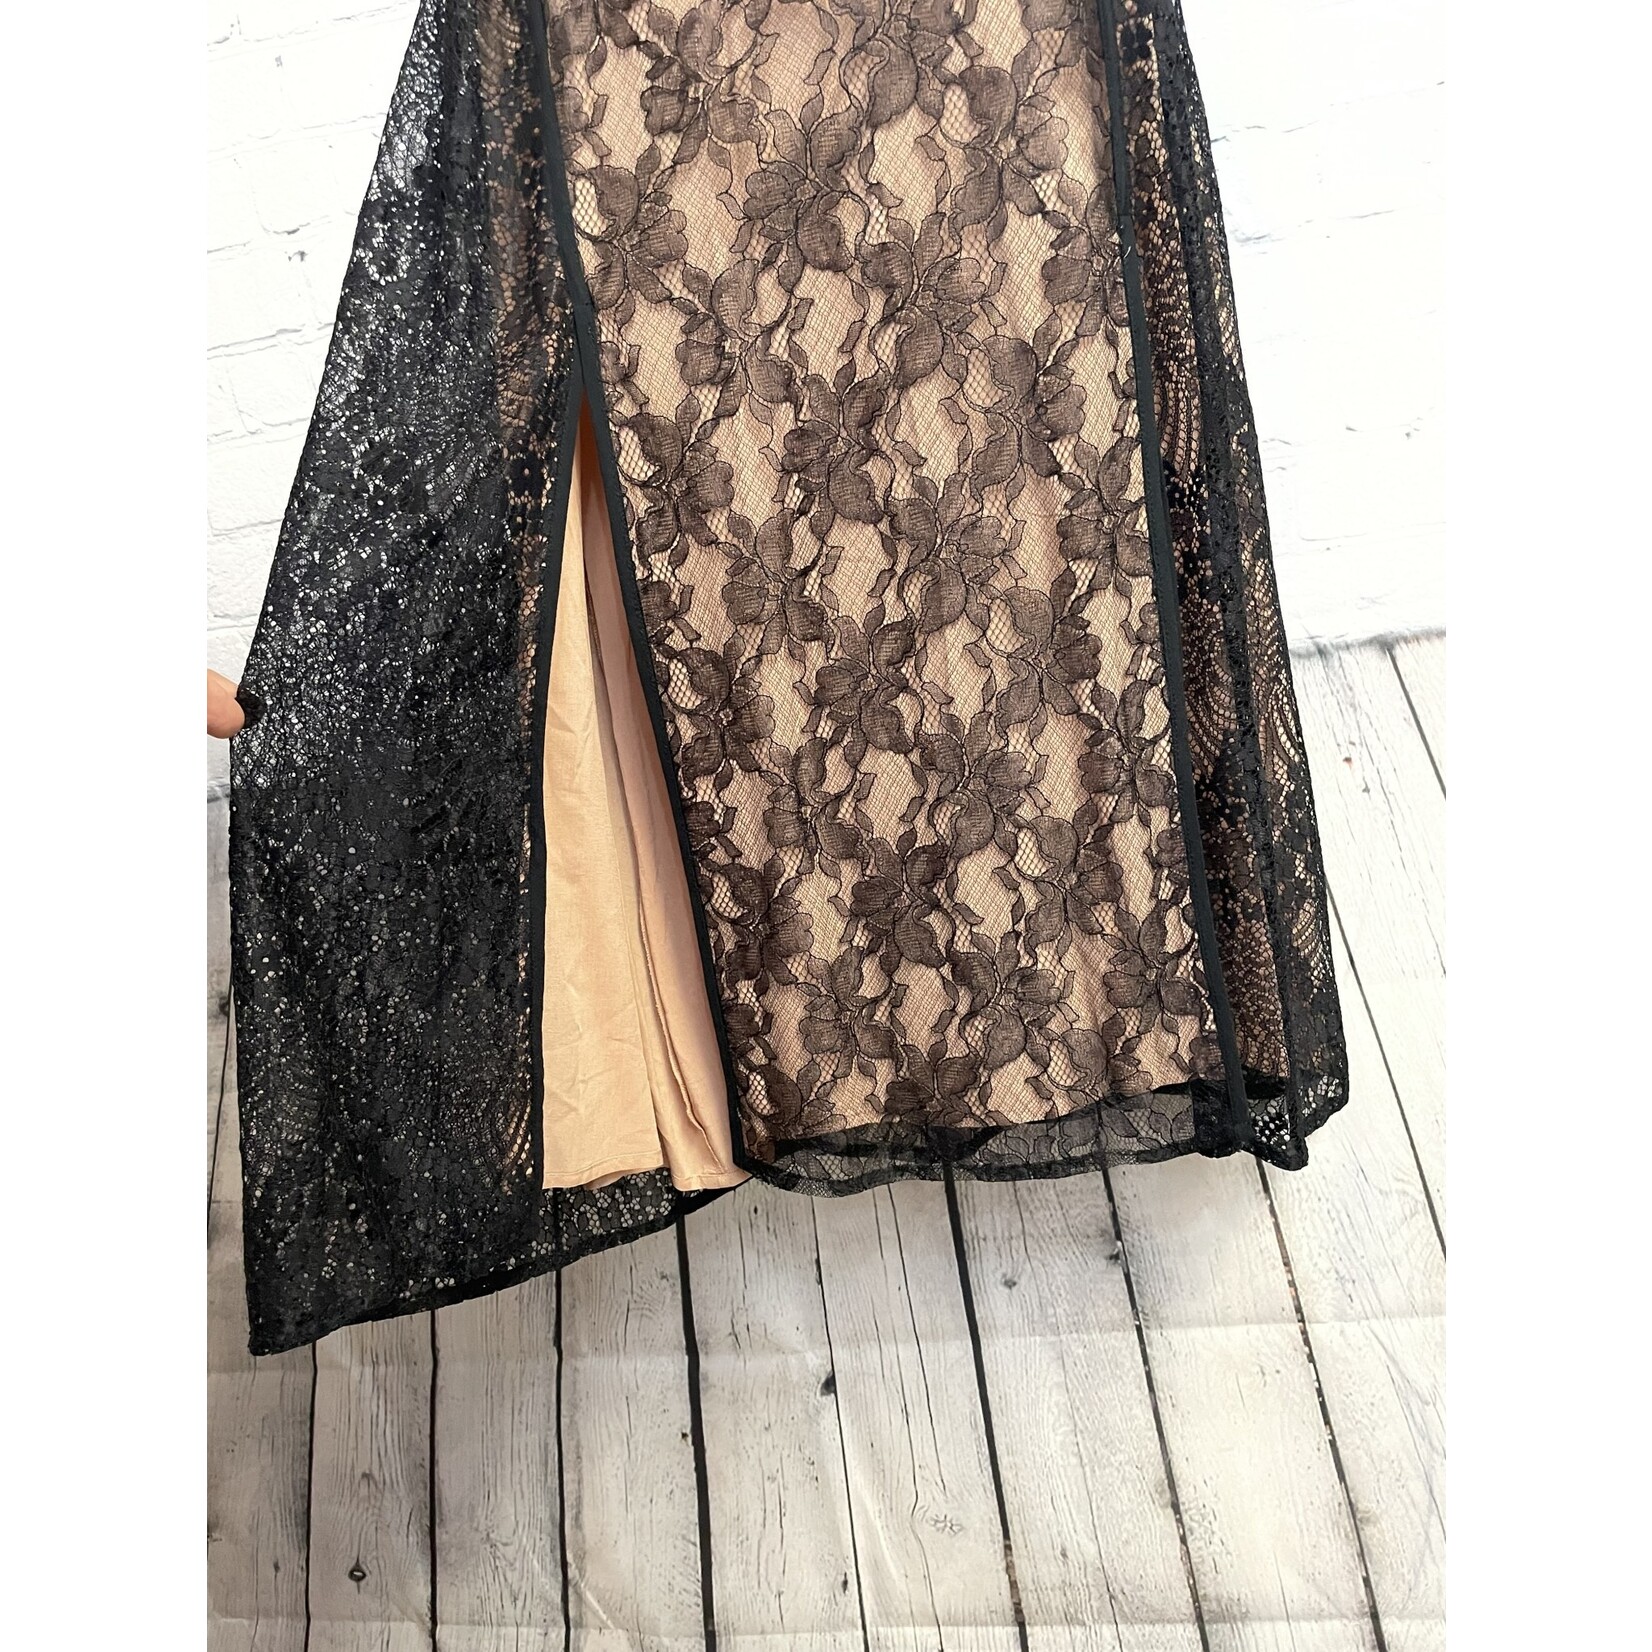 Anthropologie Anthropologie, Black, Lace, Dress, 6, NWT, MSRP $248